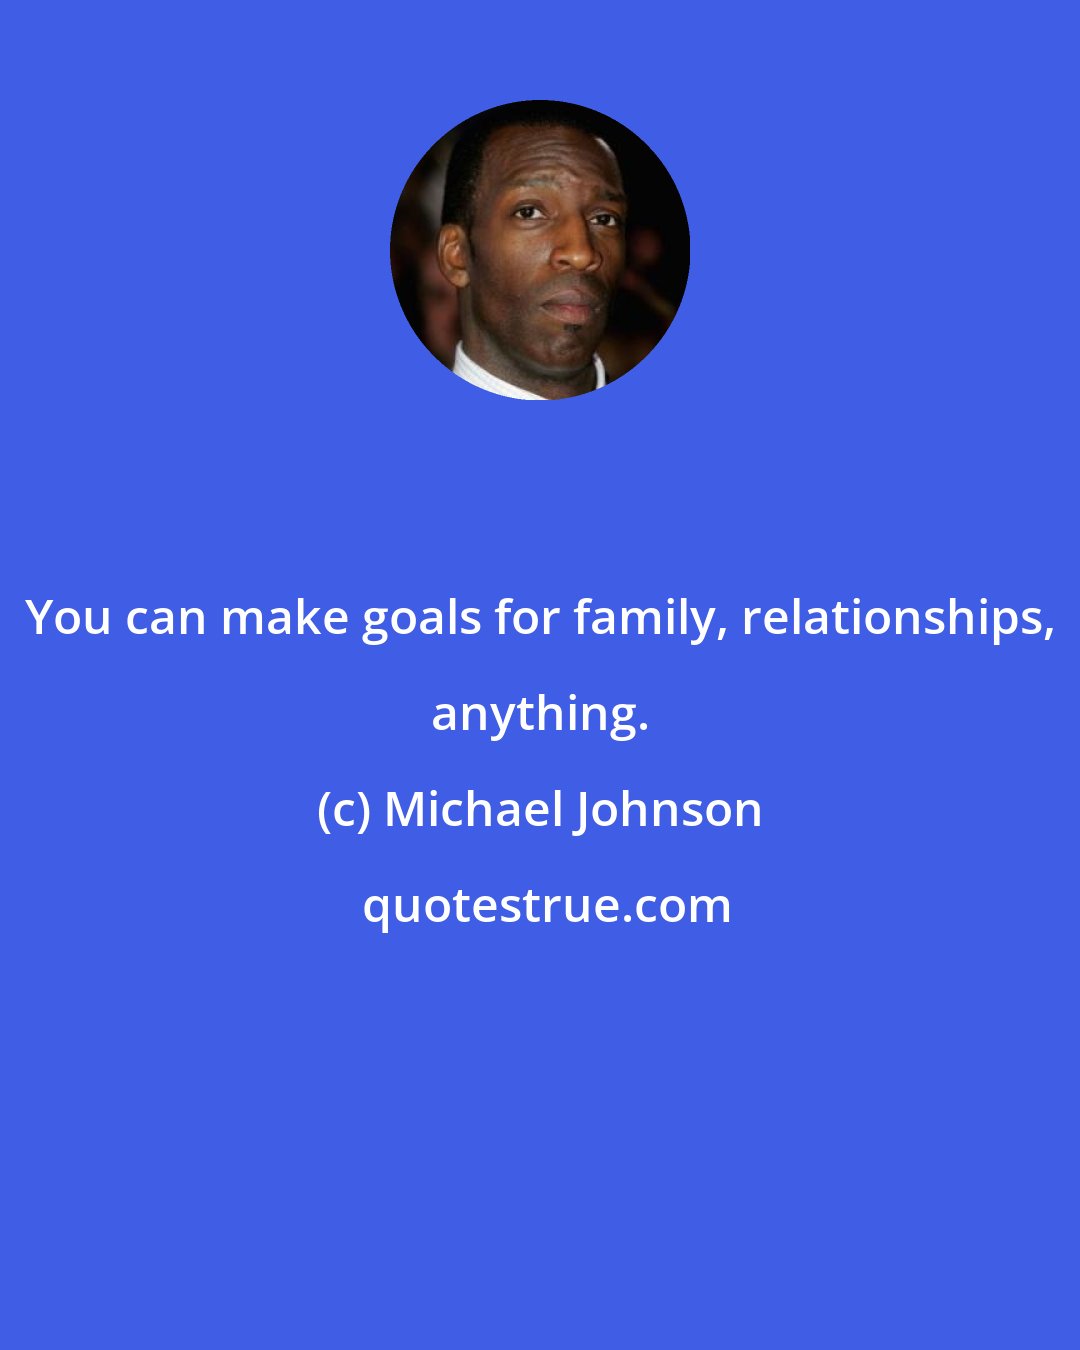 Michael Johnson: You can make goals for family, relationships, anything.